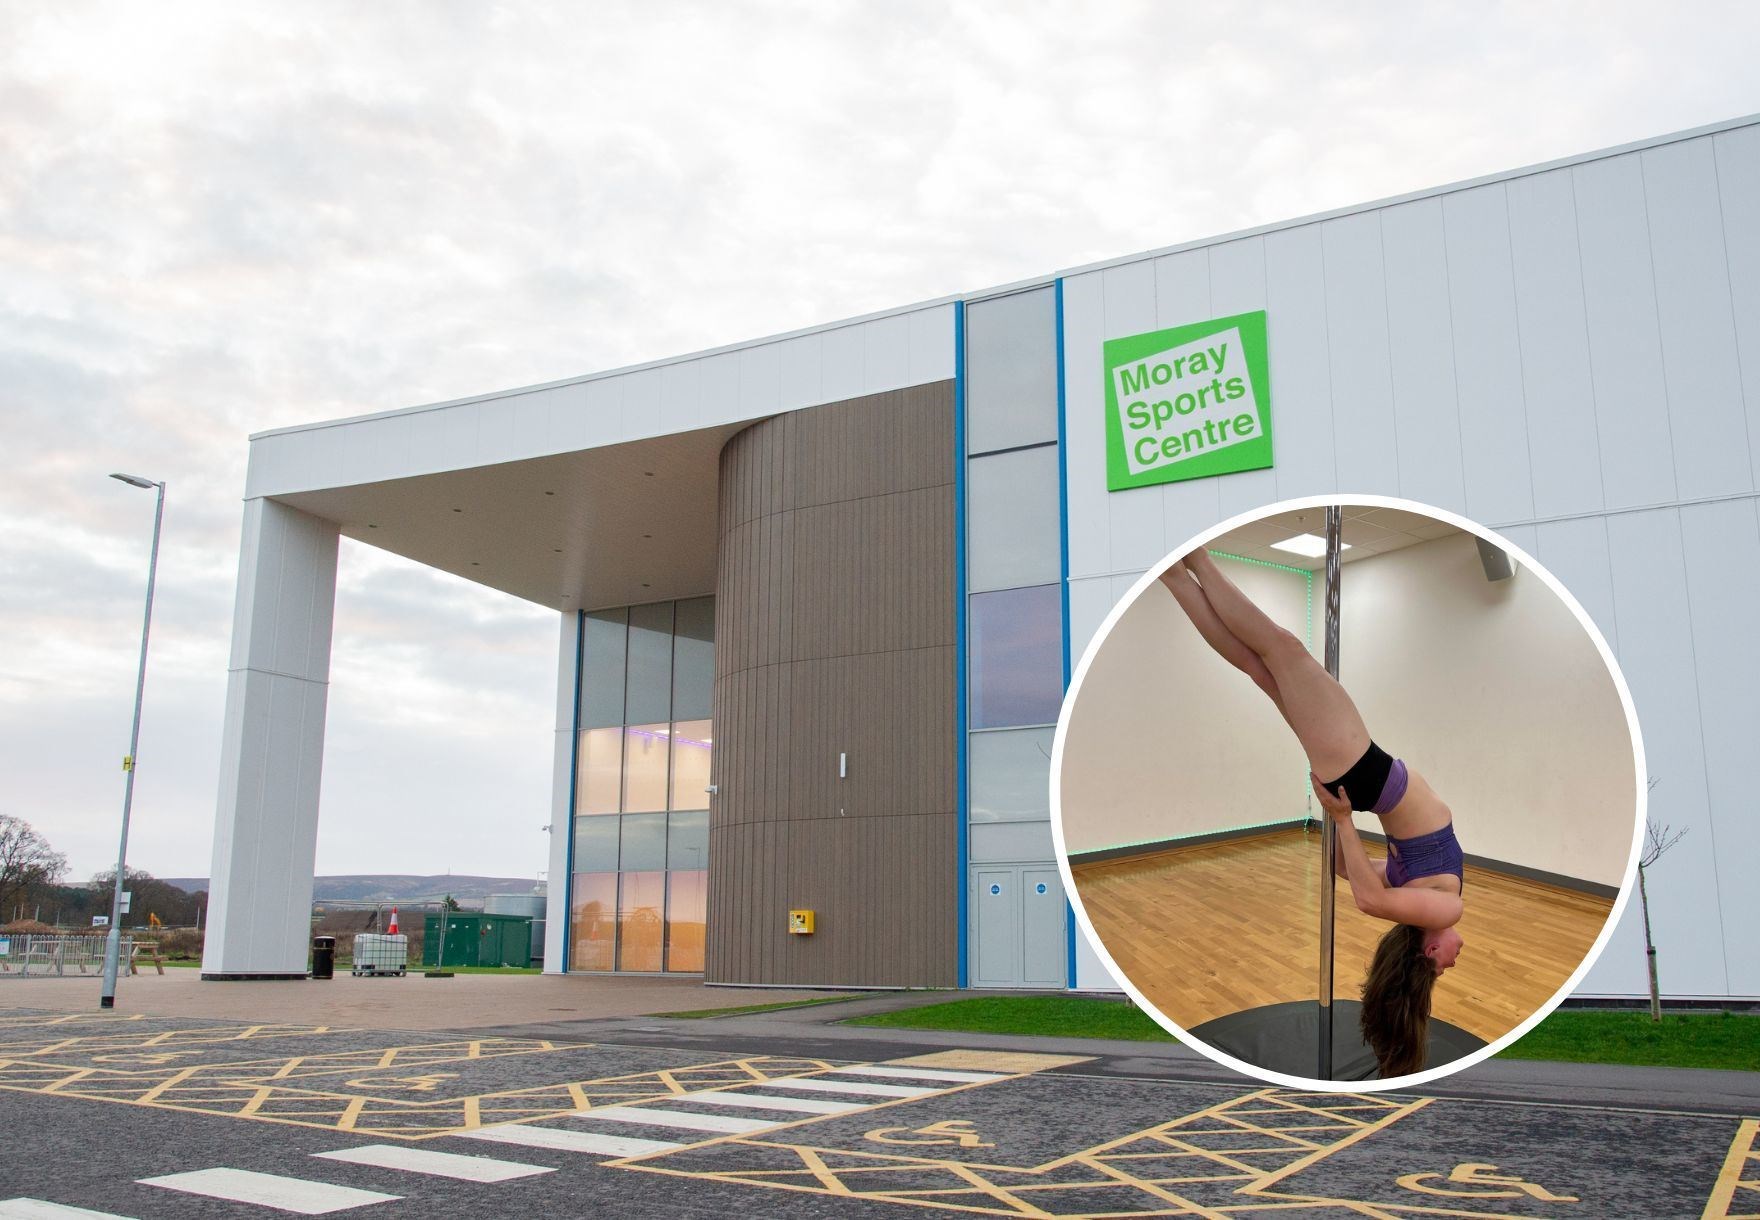 Pole fitness classes take place at Moray Sports Centre are taking place three times a week.